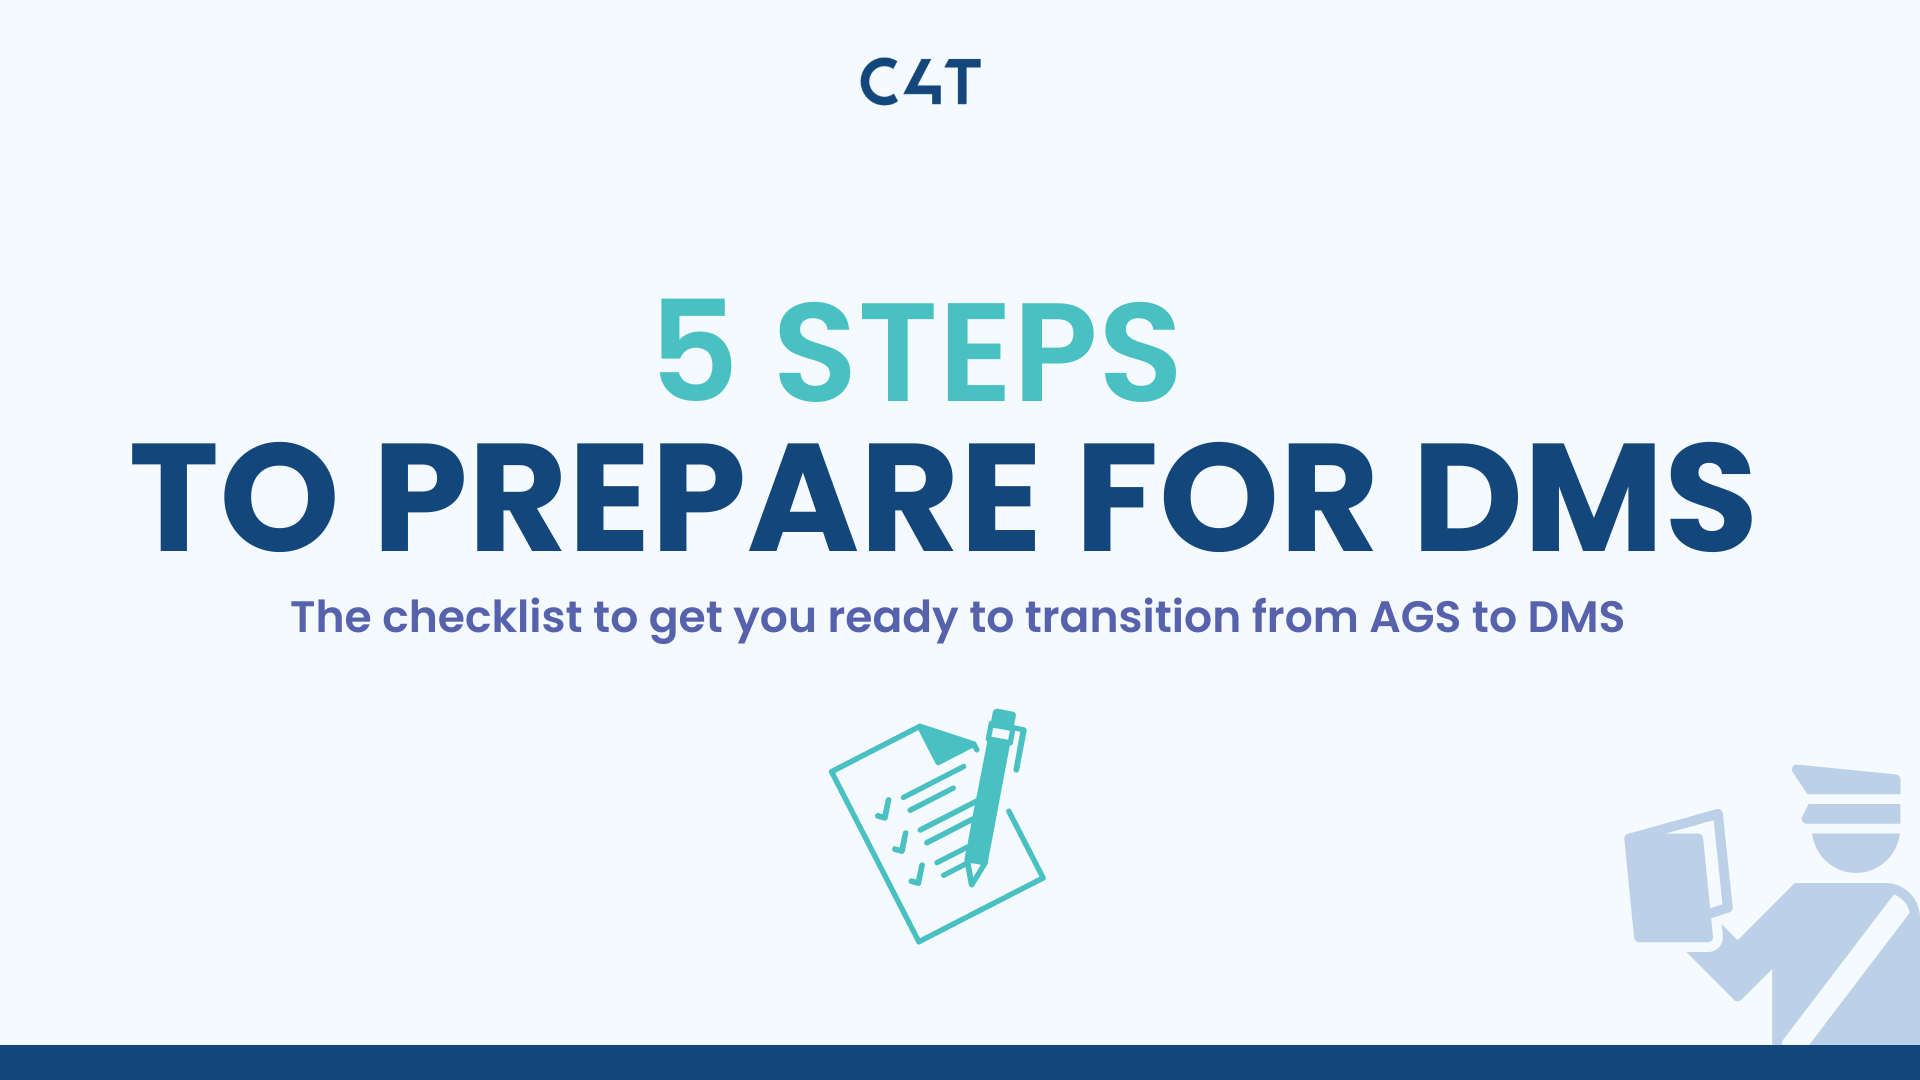 5 steps to prepare for DMS